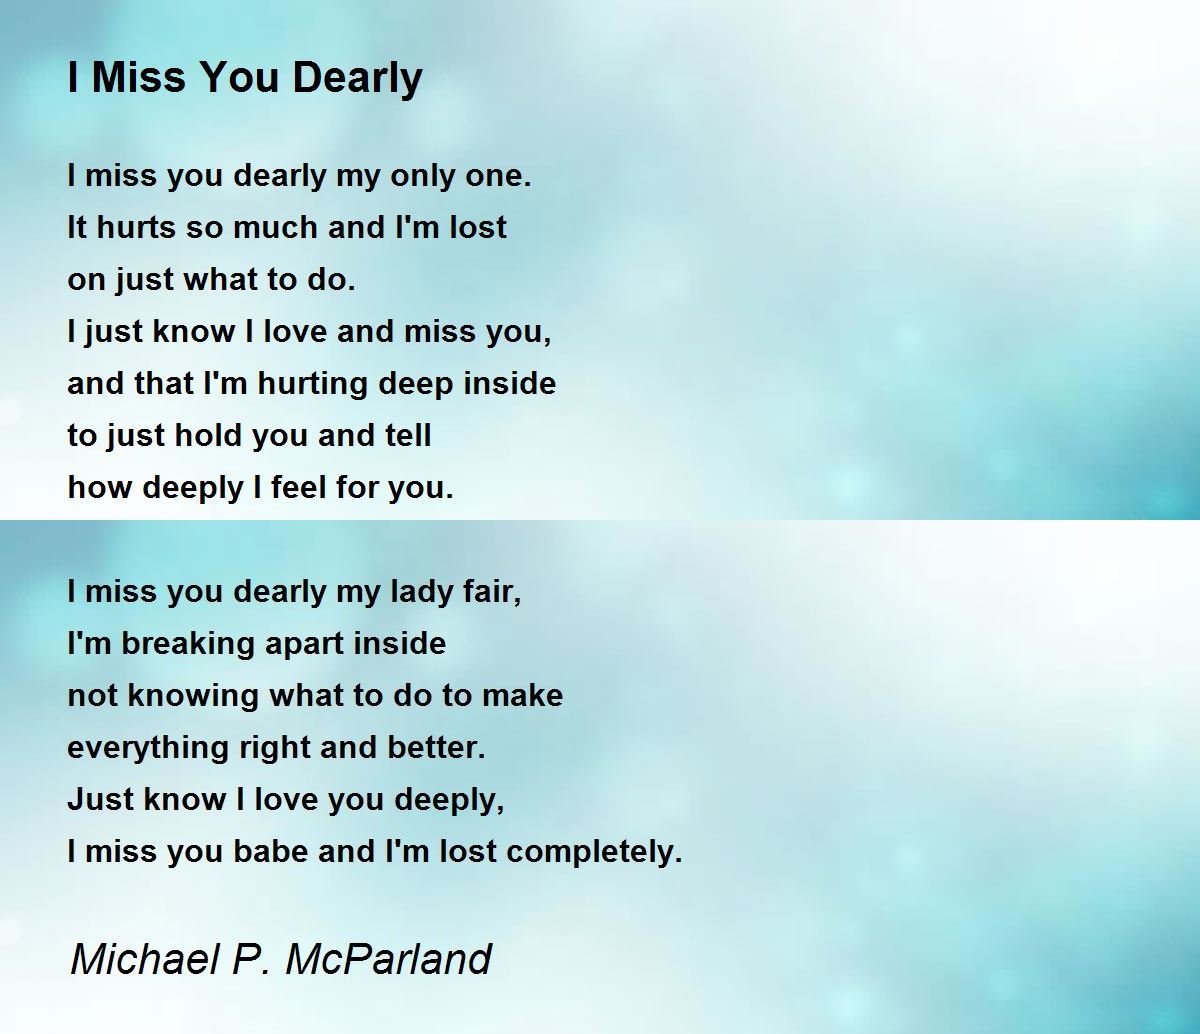 I Miss You Dearly - I Miss You Dearly Poem by Michael P. McParland